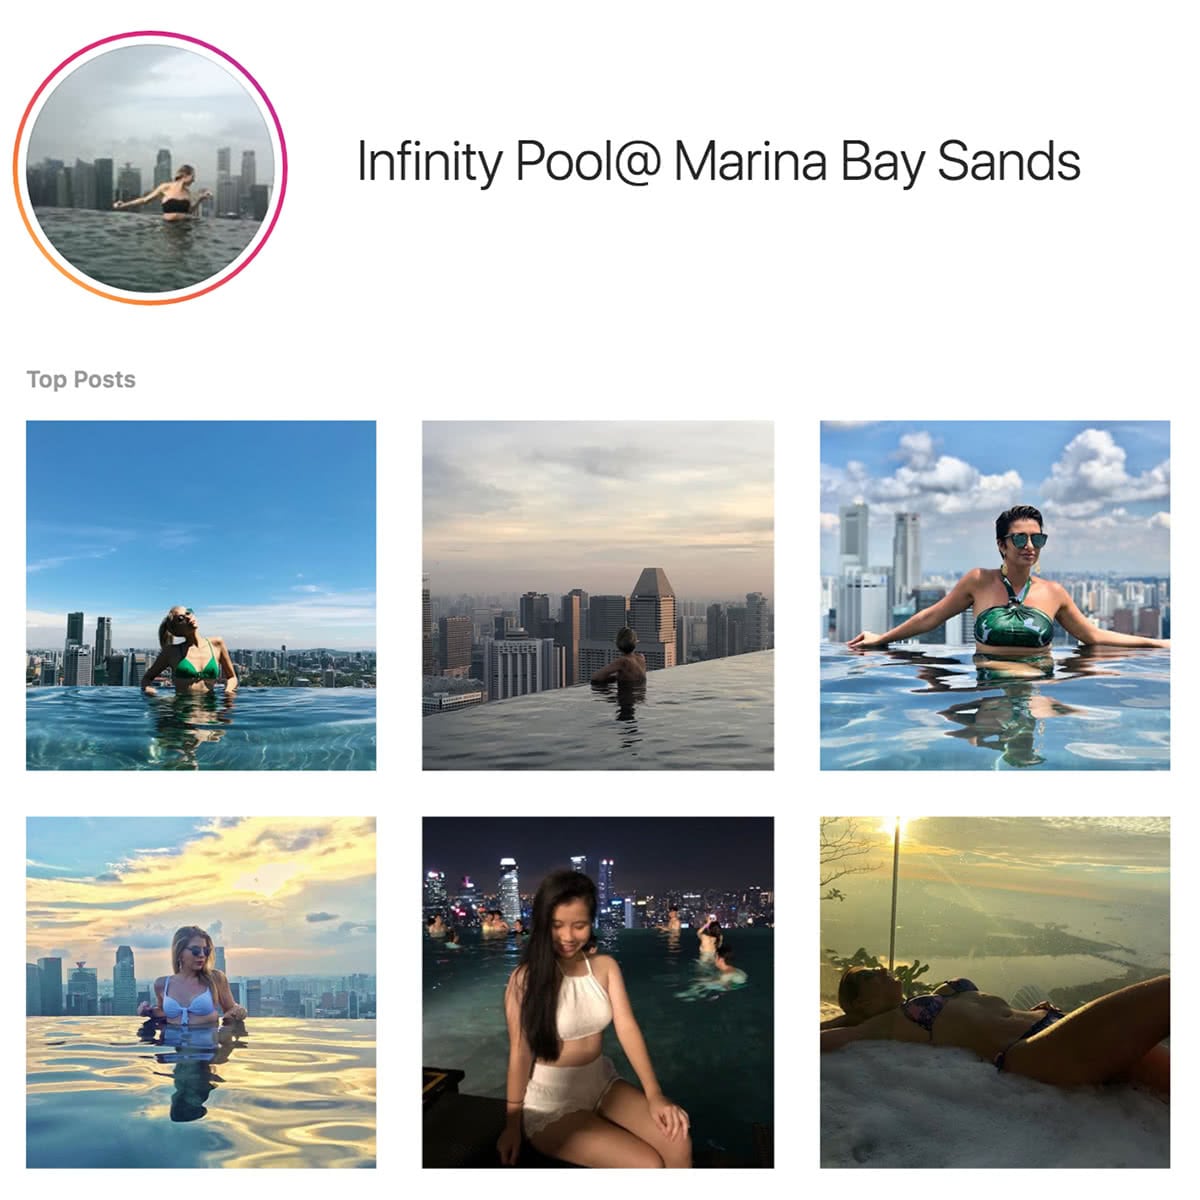 Luxe Digital luxury travel world most instagramed hotel Marina Bay Sands infinity pool